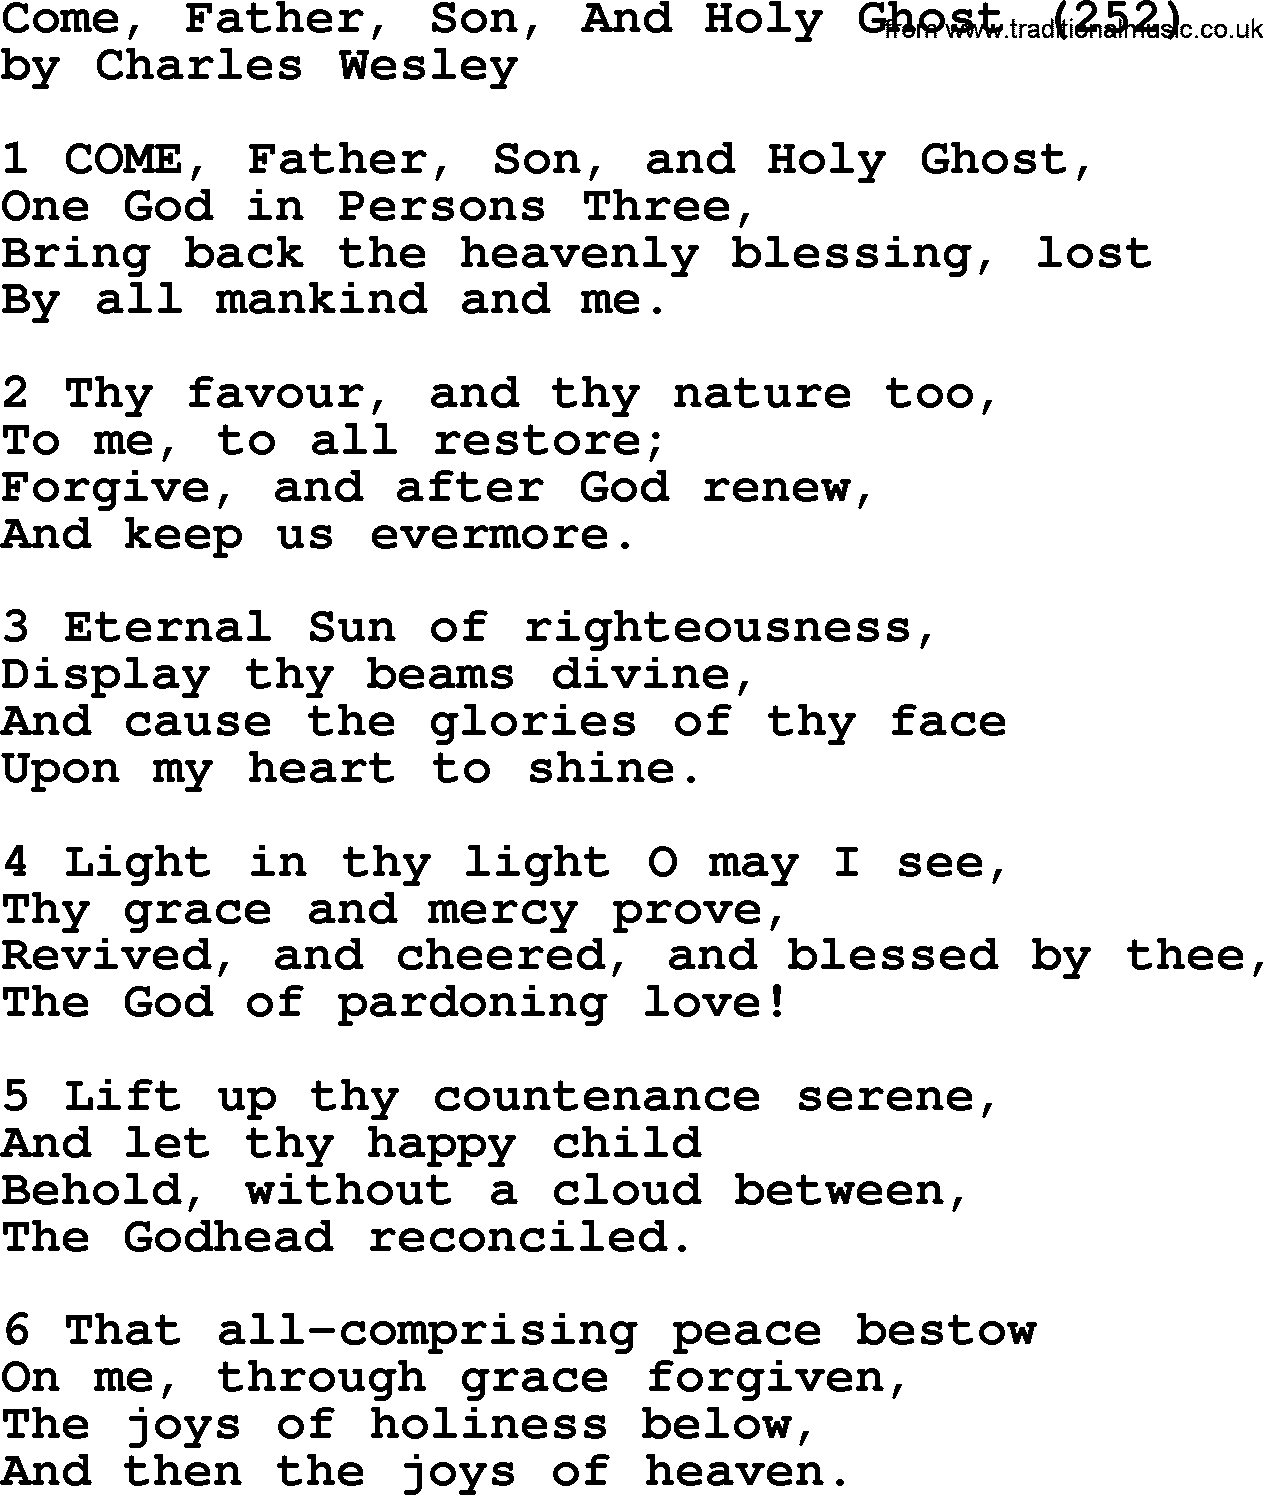 Charles Wesley hymn: Come, Father, Son, And Holy Ghost (252), lyrics